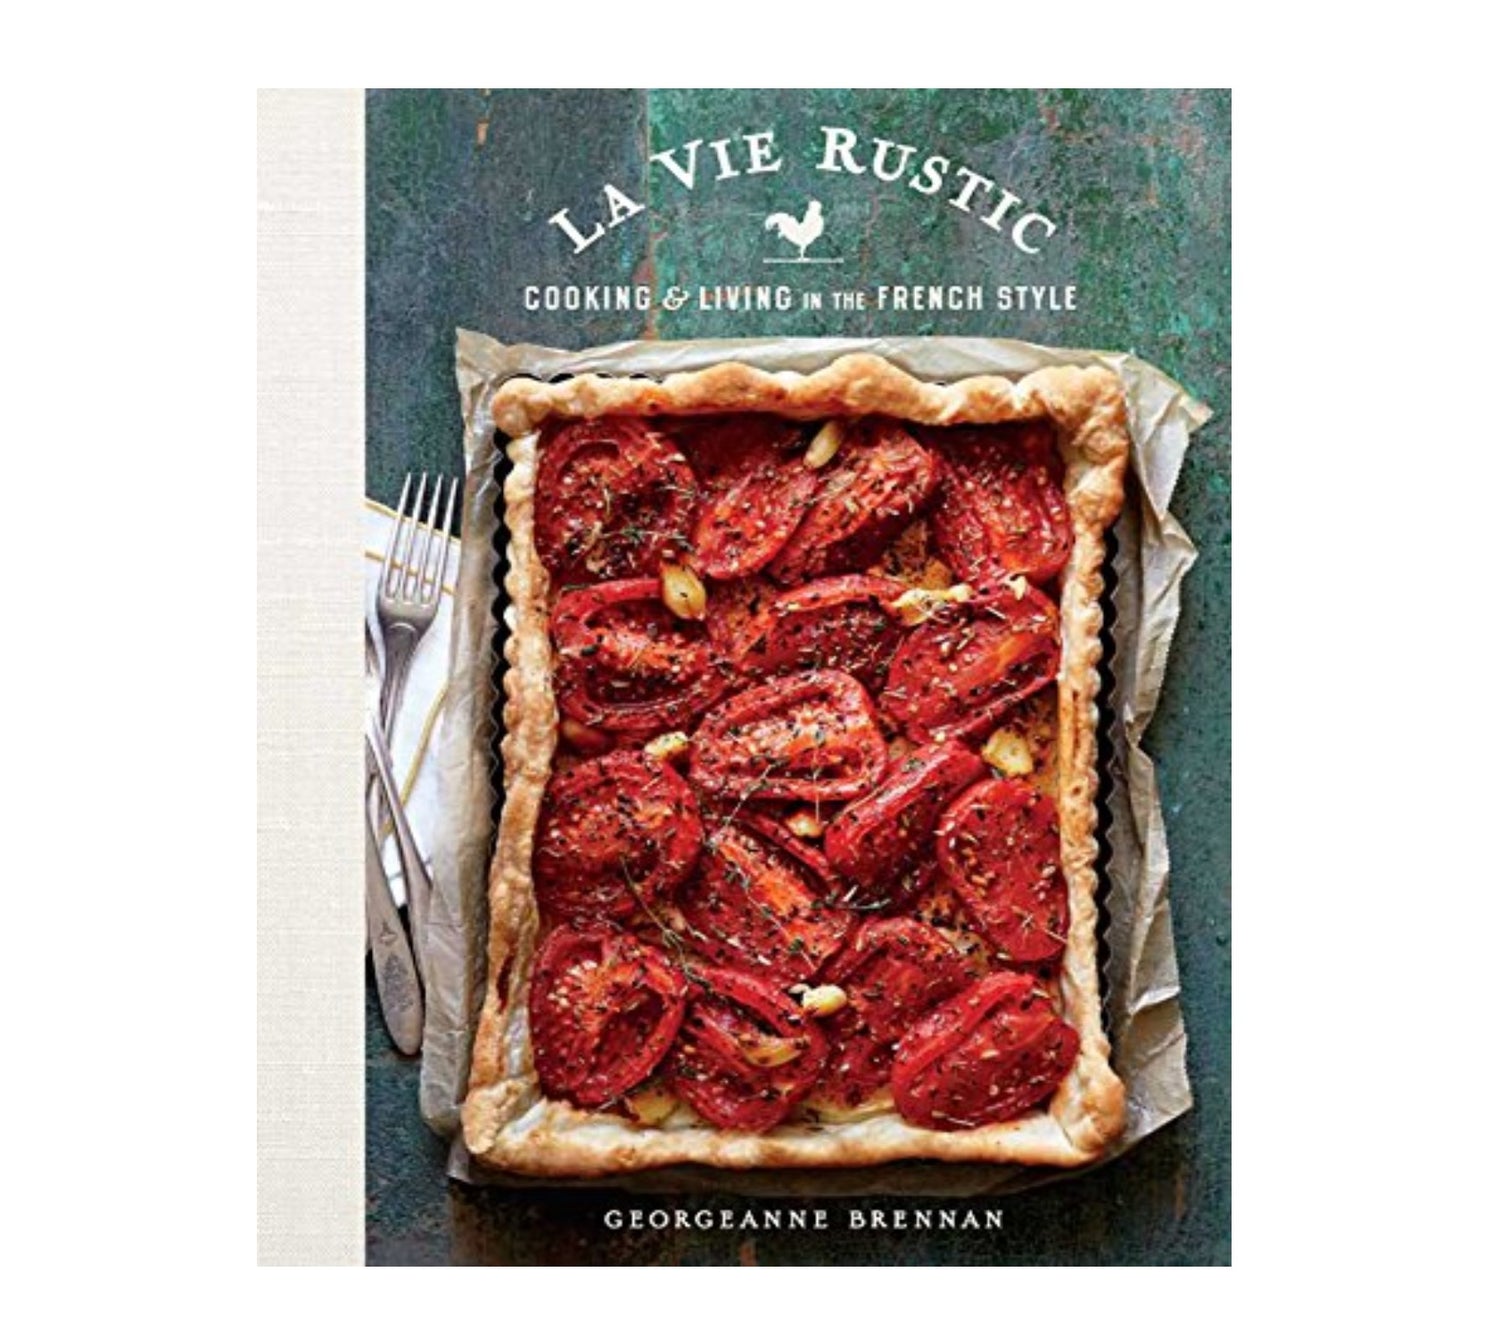 La Vie Rustic - Cooking and Living in the French Style by Georgeanne Brennan